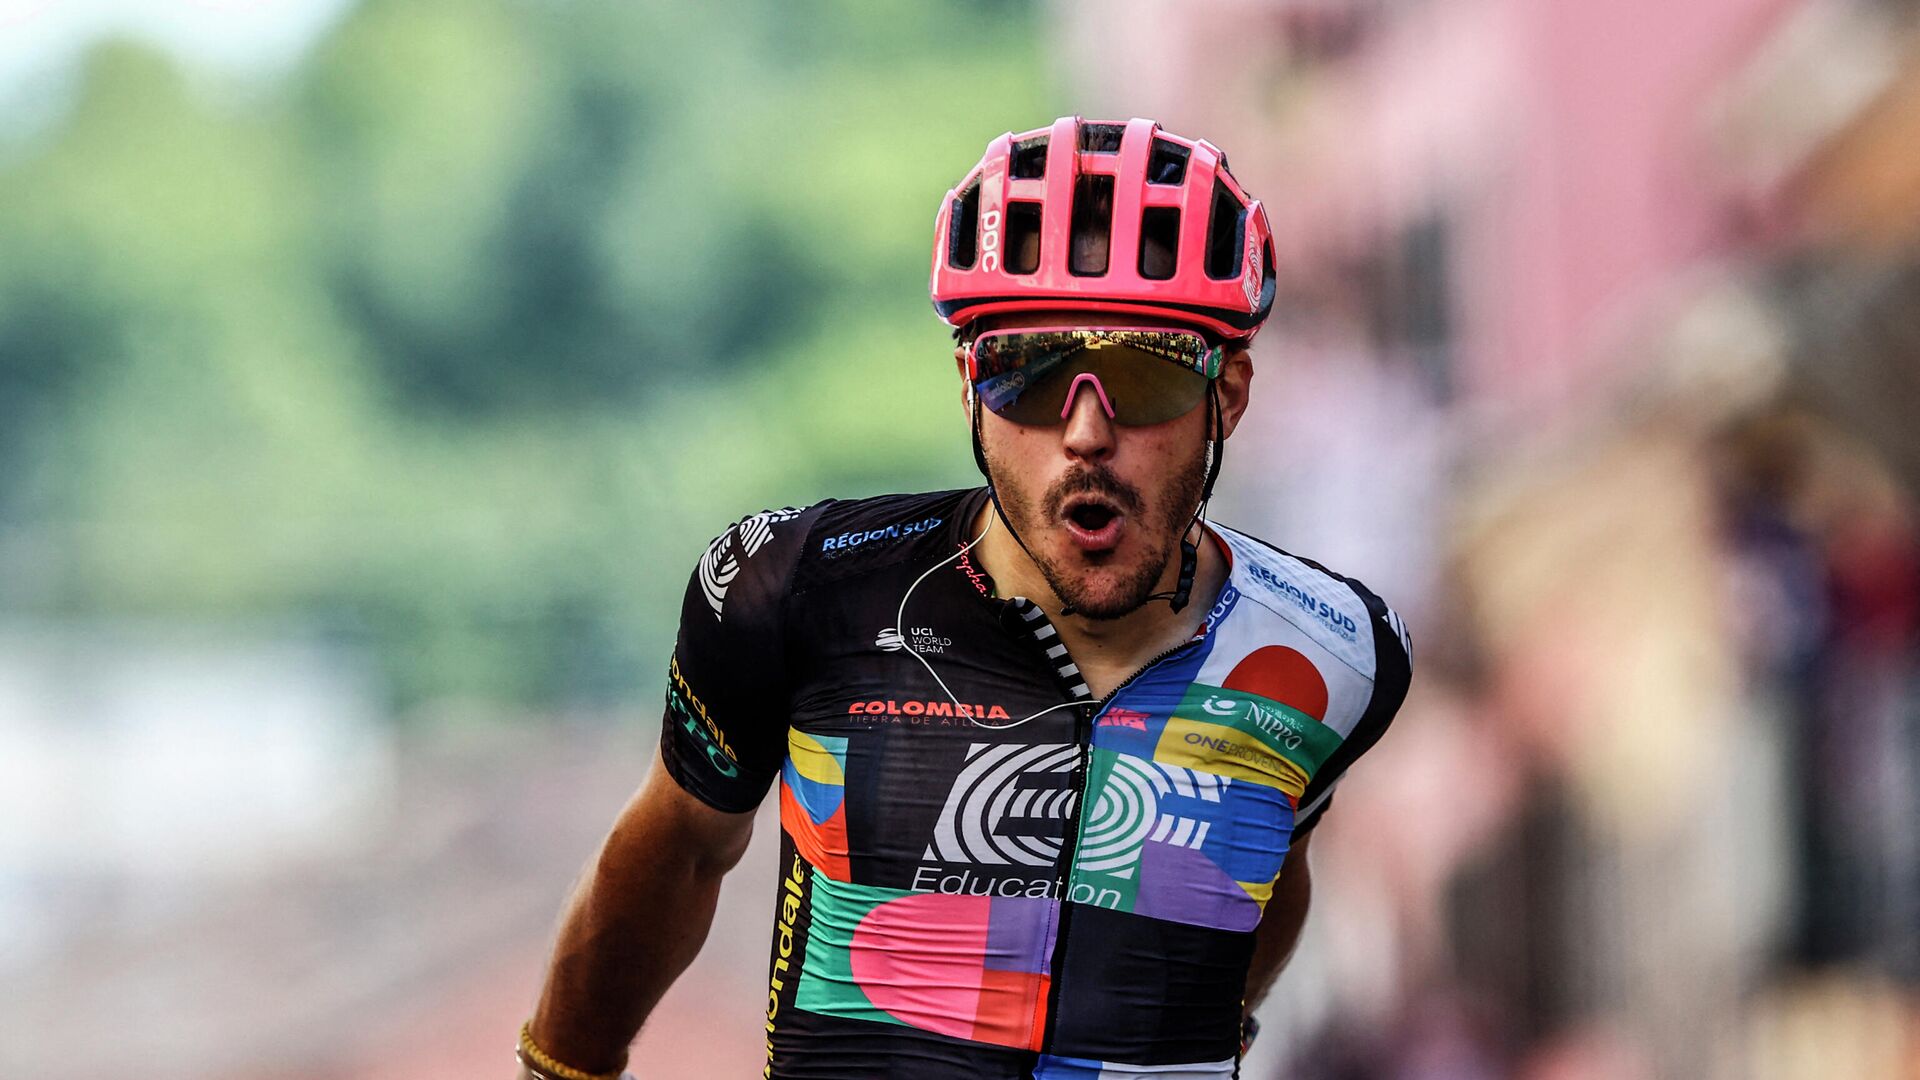 Team EF Education rider Italy's Alberto Bettiol celebrates as he crosses the finish line to win the 18th stage of the Giro d'Italia 2021 cycling race, 231km between Rovereto and Stradella on May 27, 2021. (Photo by Luca BETTINI / AFP) - РИА Новости, 1920, 27.05.2021